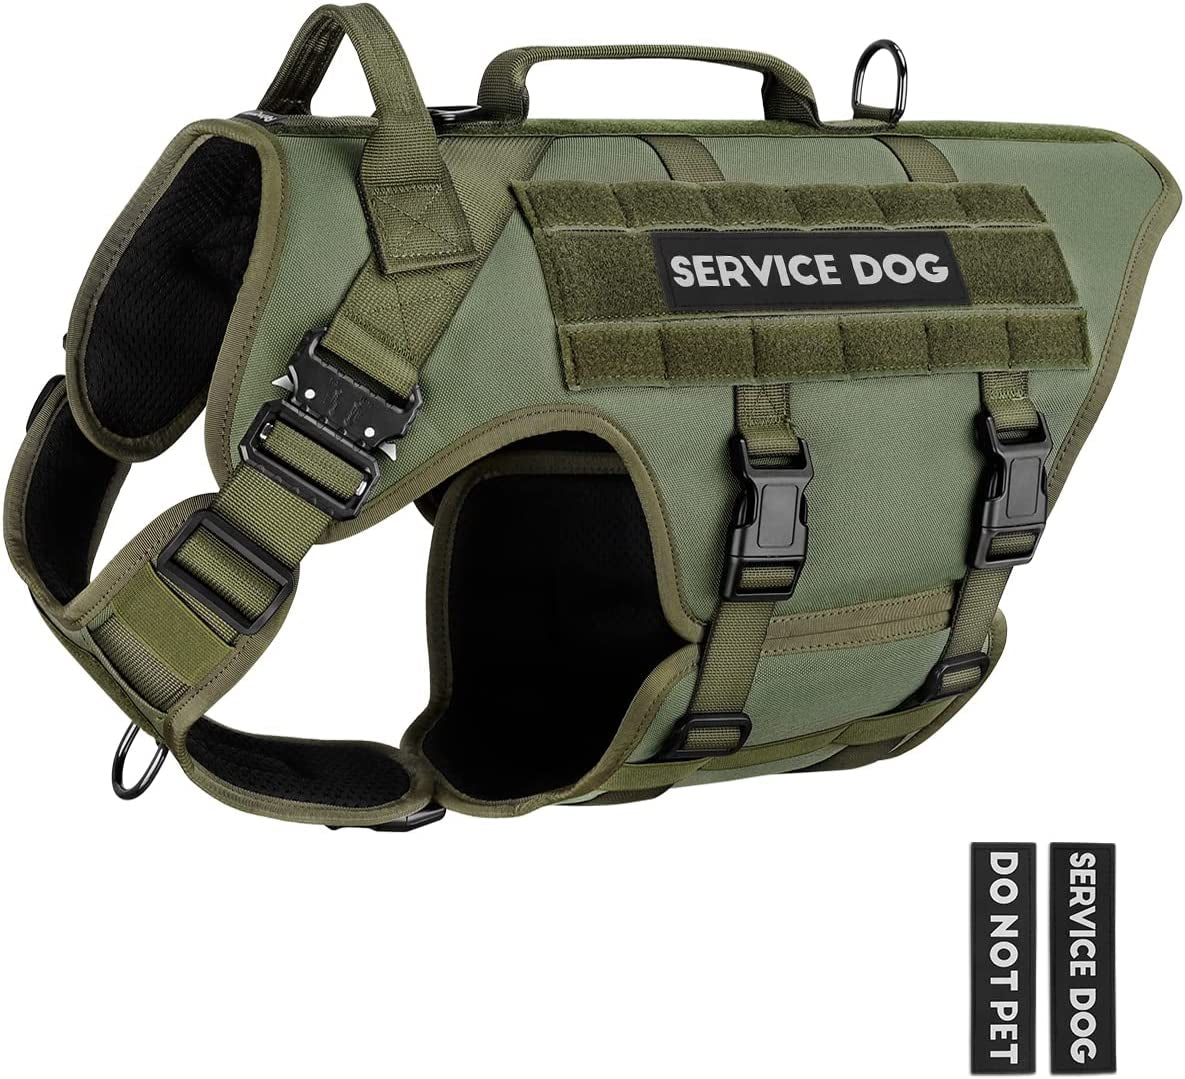 Tactical Dog Harness - PETNANNY Service Dog Vest for Large Dogs Fully Body Coverage in Training Dog Harness with 2 Reflective Dog Patches, Handle, Hook and Loop Panels, Walking Hunting Dog MOLLE Vest Animals & Pet Supplies > Pet Supplies > Dog Supplies > Dog Apparel PETNANNY Green L 